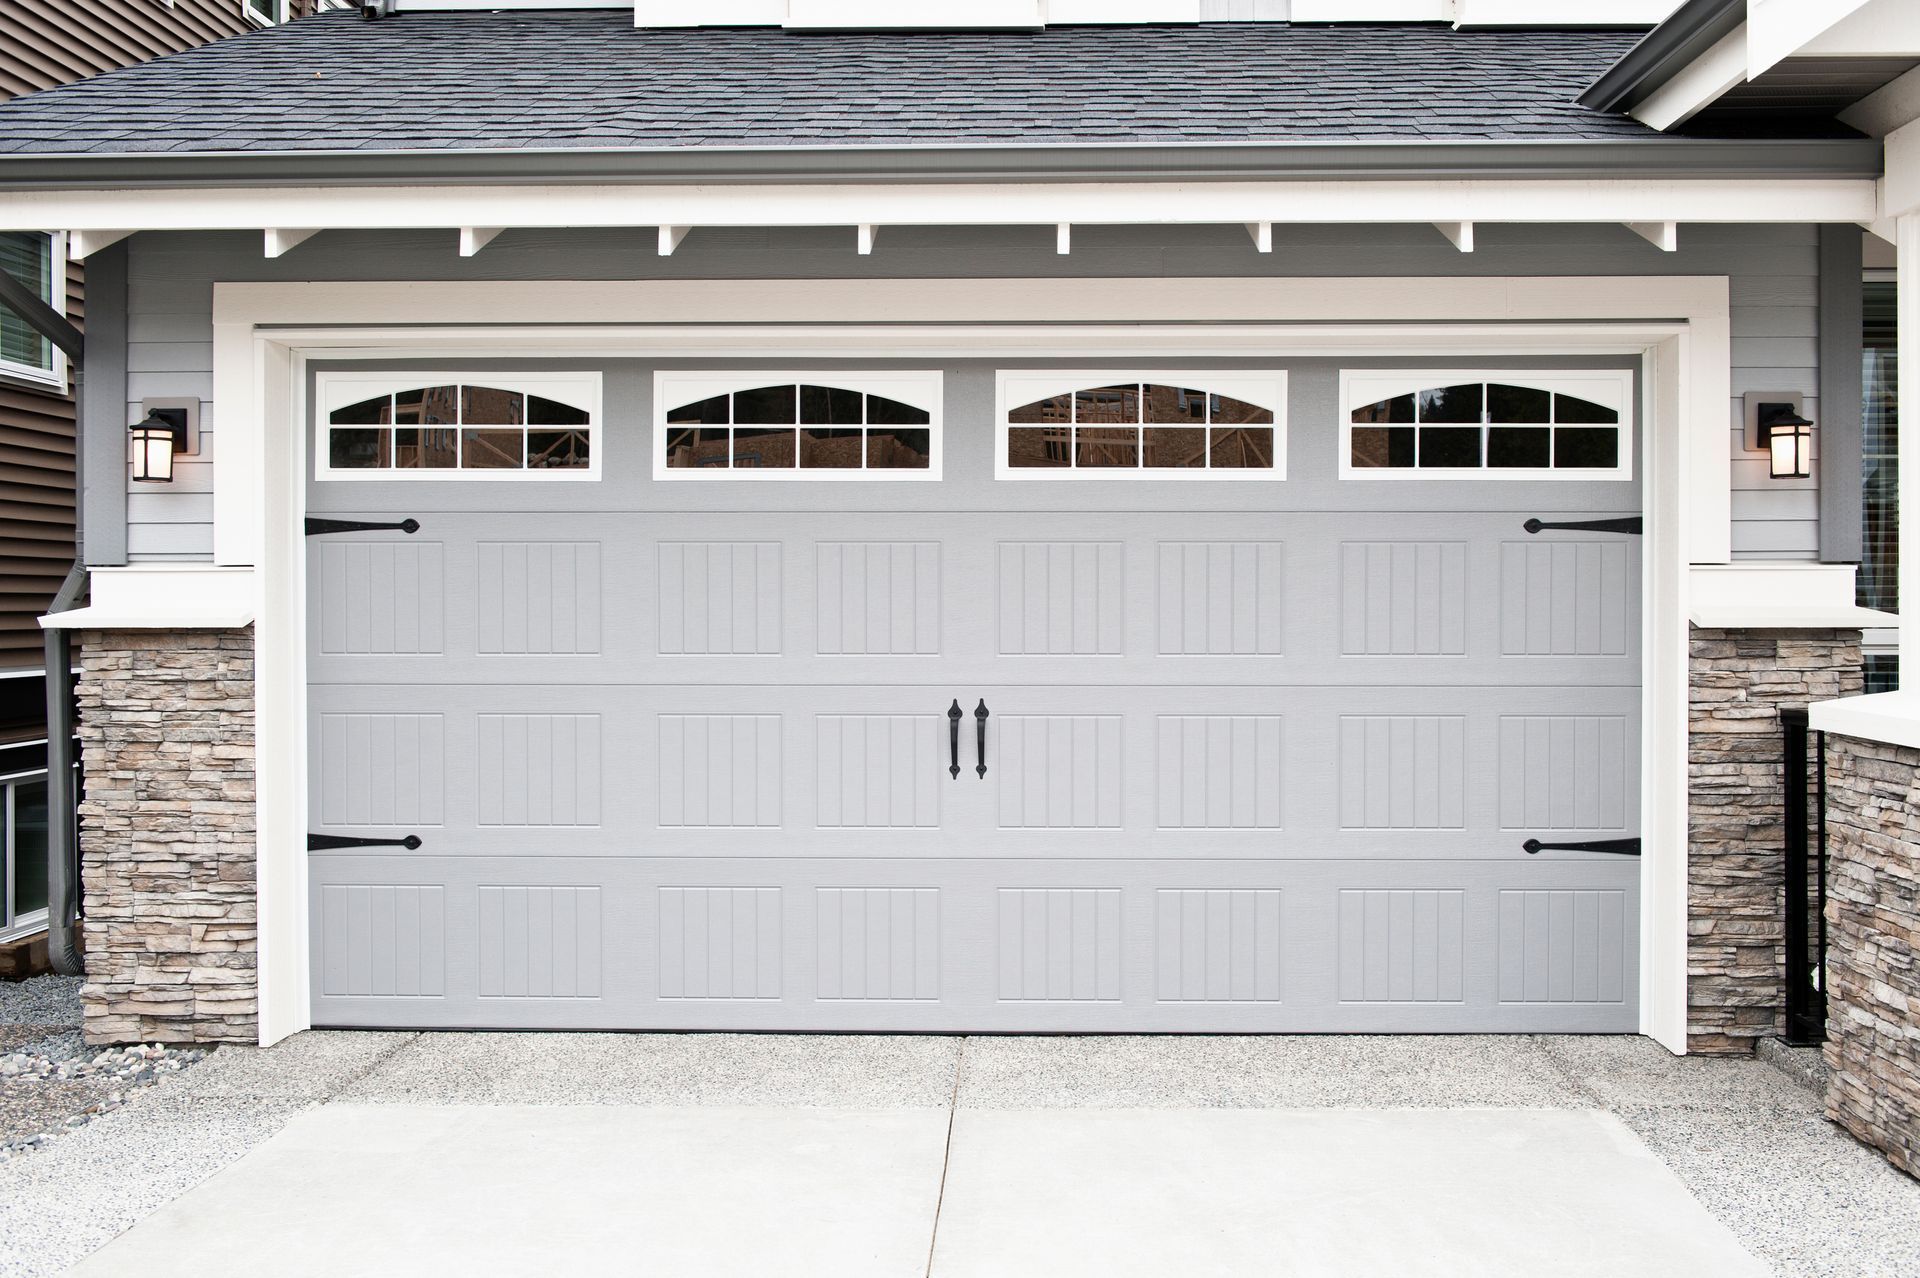 Residential garage door with a spacious driveway leading up to it.